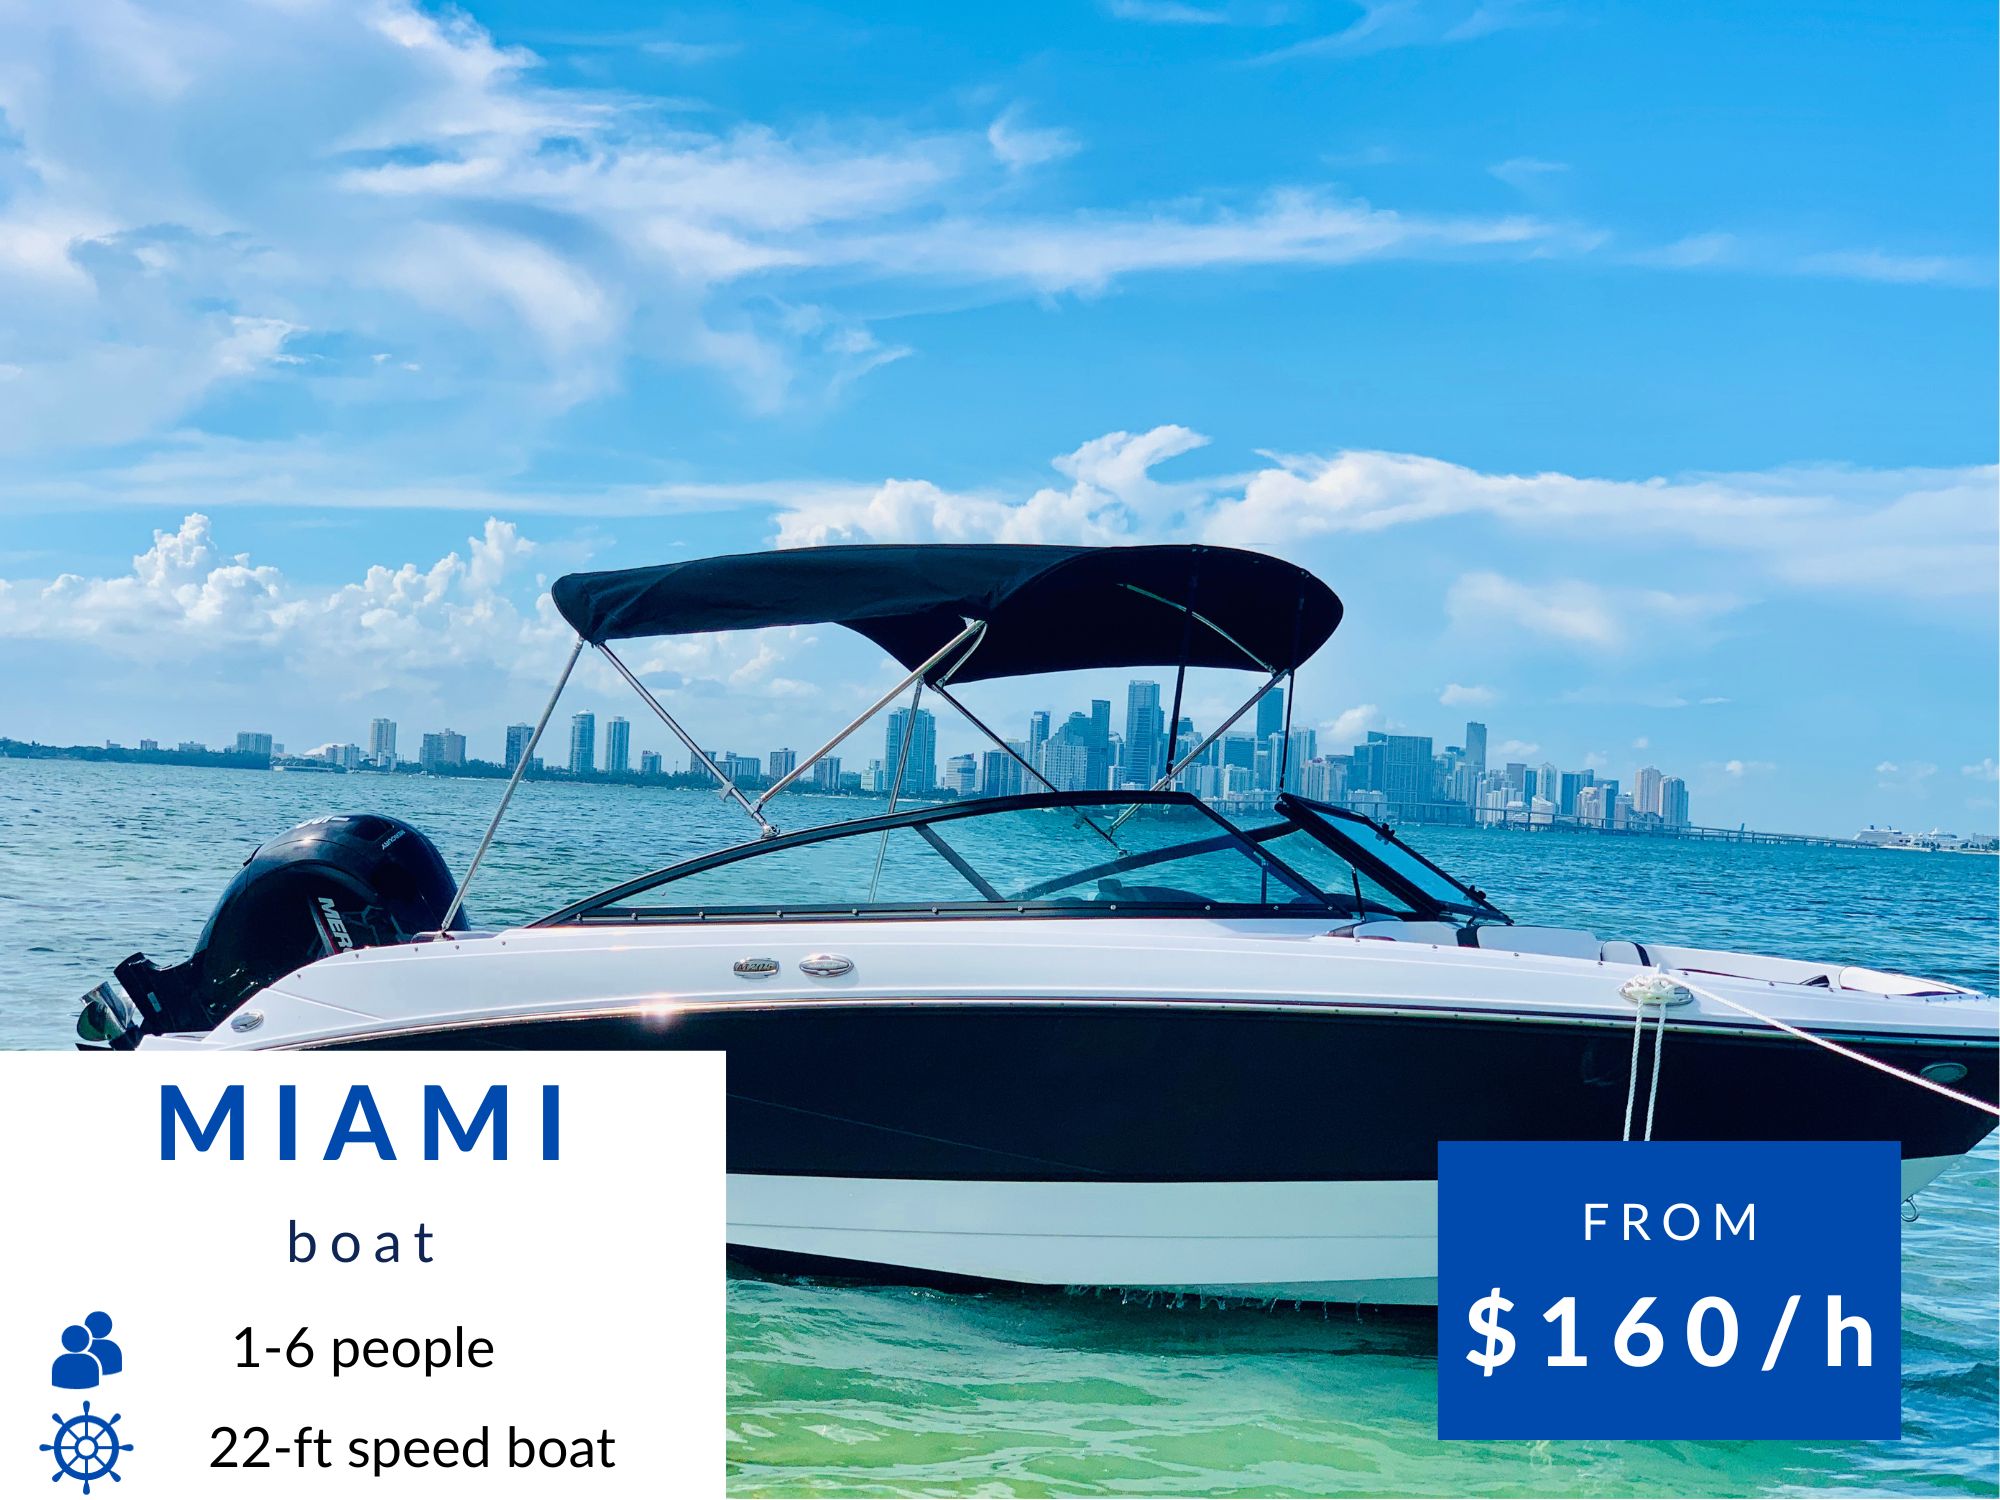 Best Miami Boats For Rent For Social Gatherings In Miami!